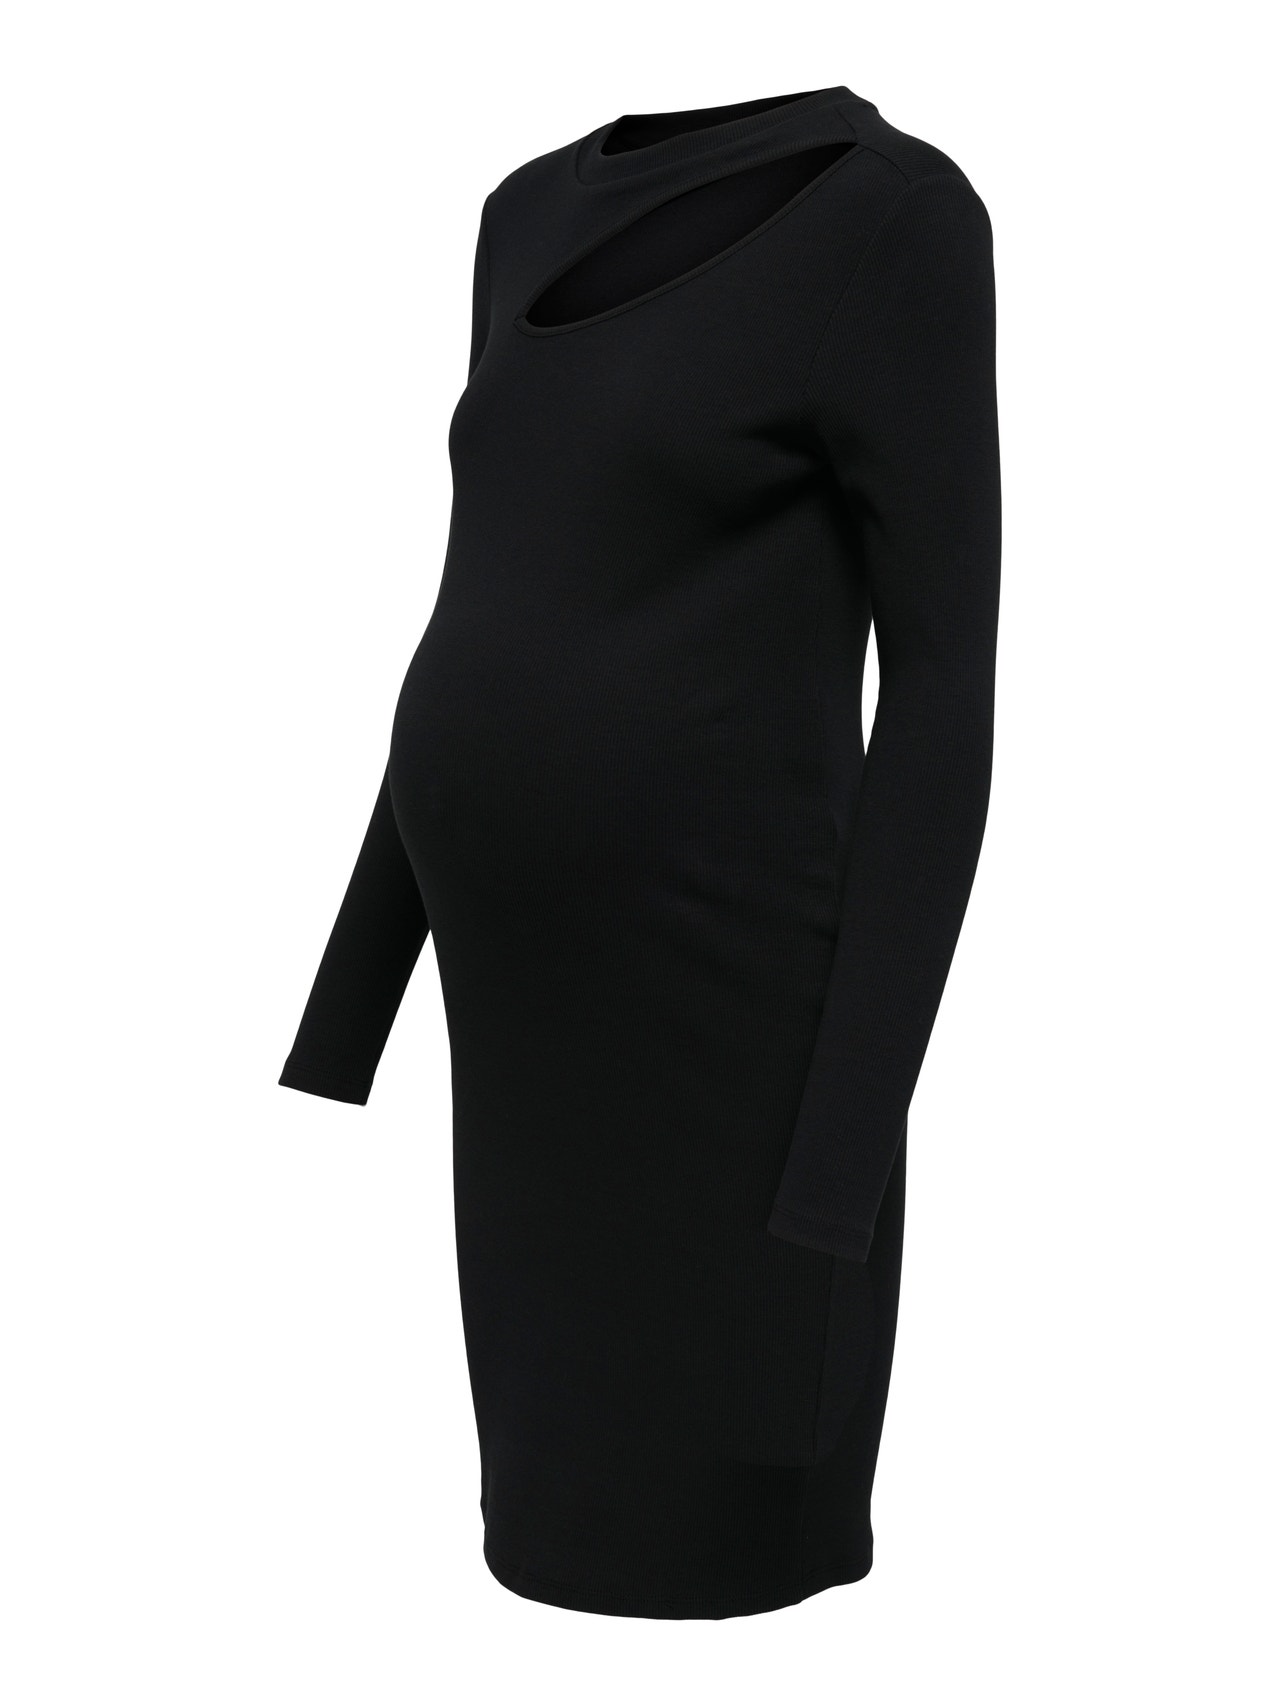 Slim Fit O-Neck Maternity Short dress with 30% discount!